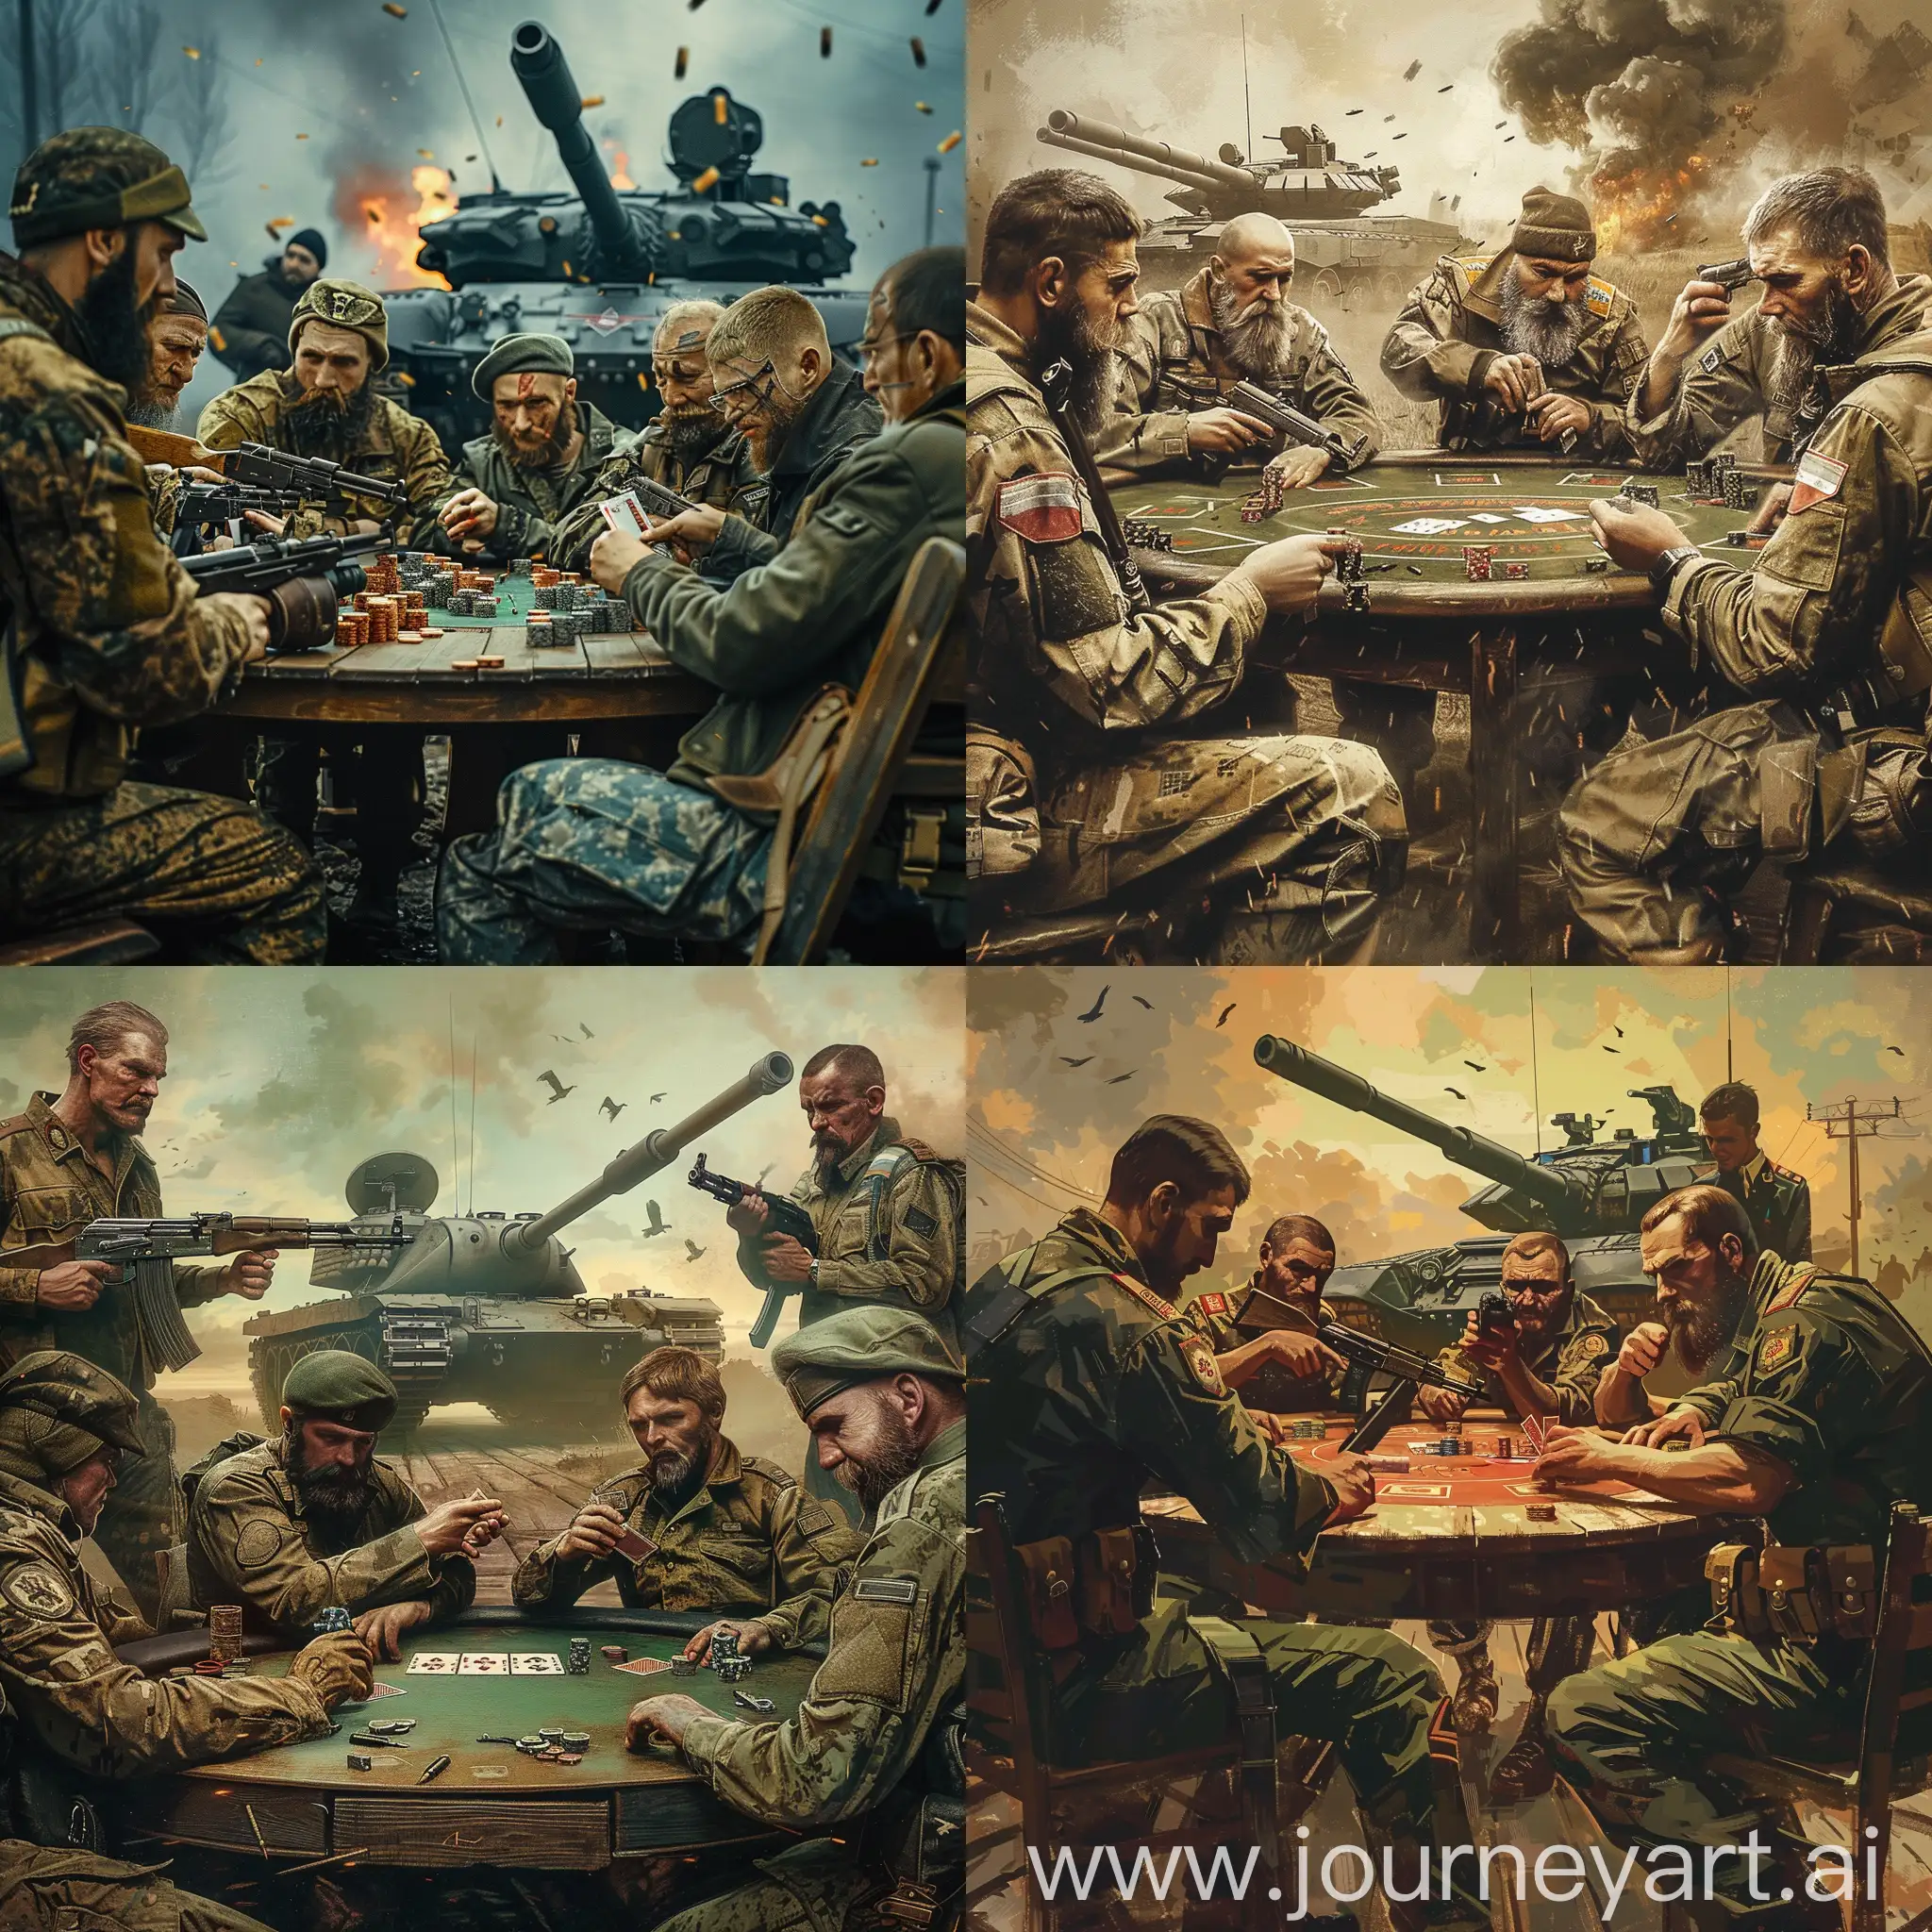 Men are sitting playing poker in military uniforms Russians are holding machine guns pistols grenade launchers knives in the background a tank is super realistic